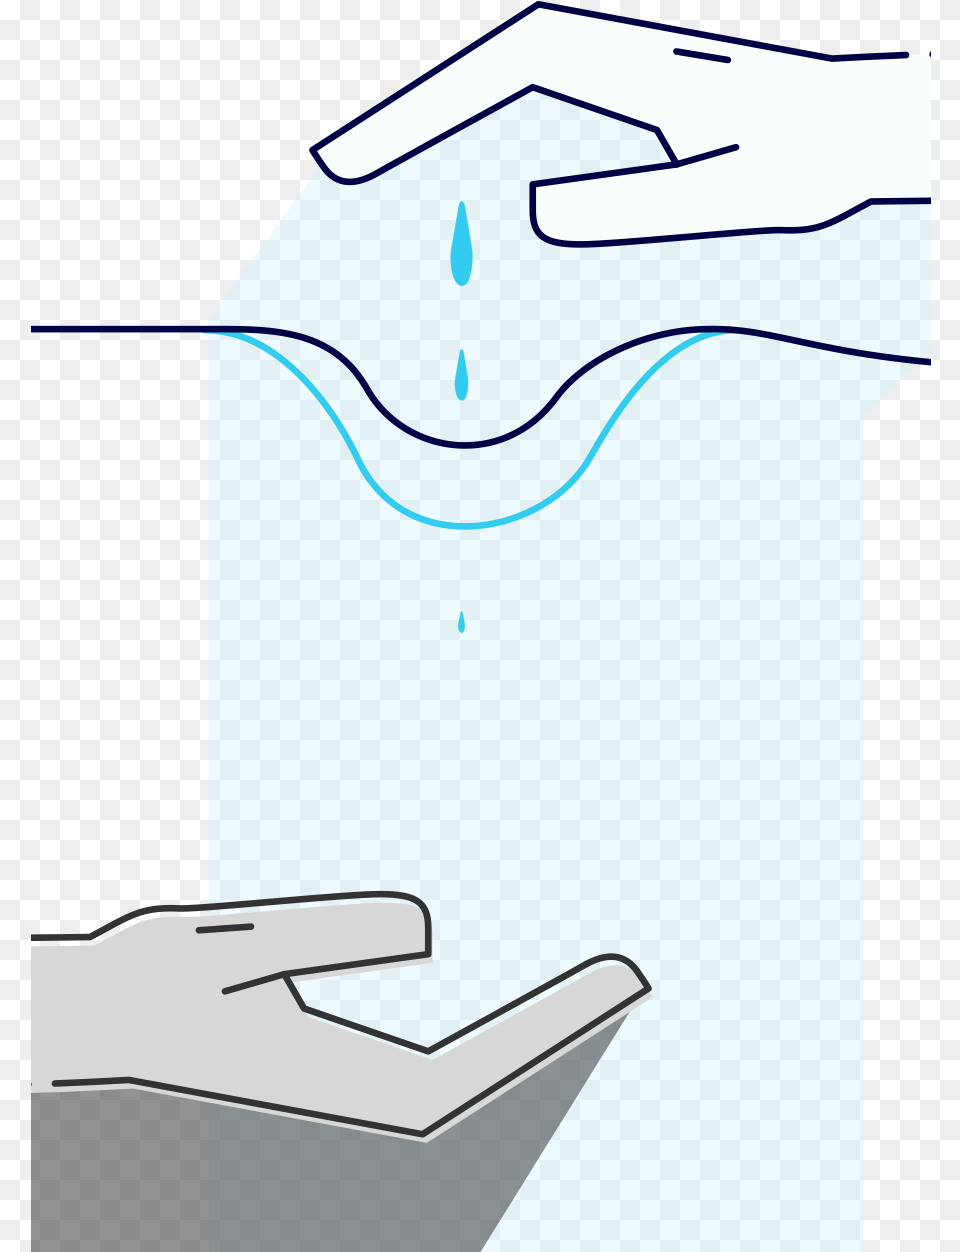 Illustration Of Two Hands One Supplies The Other With, Ice, Outdoors, Nature, Architecture Free Transparent Png